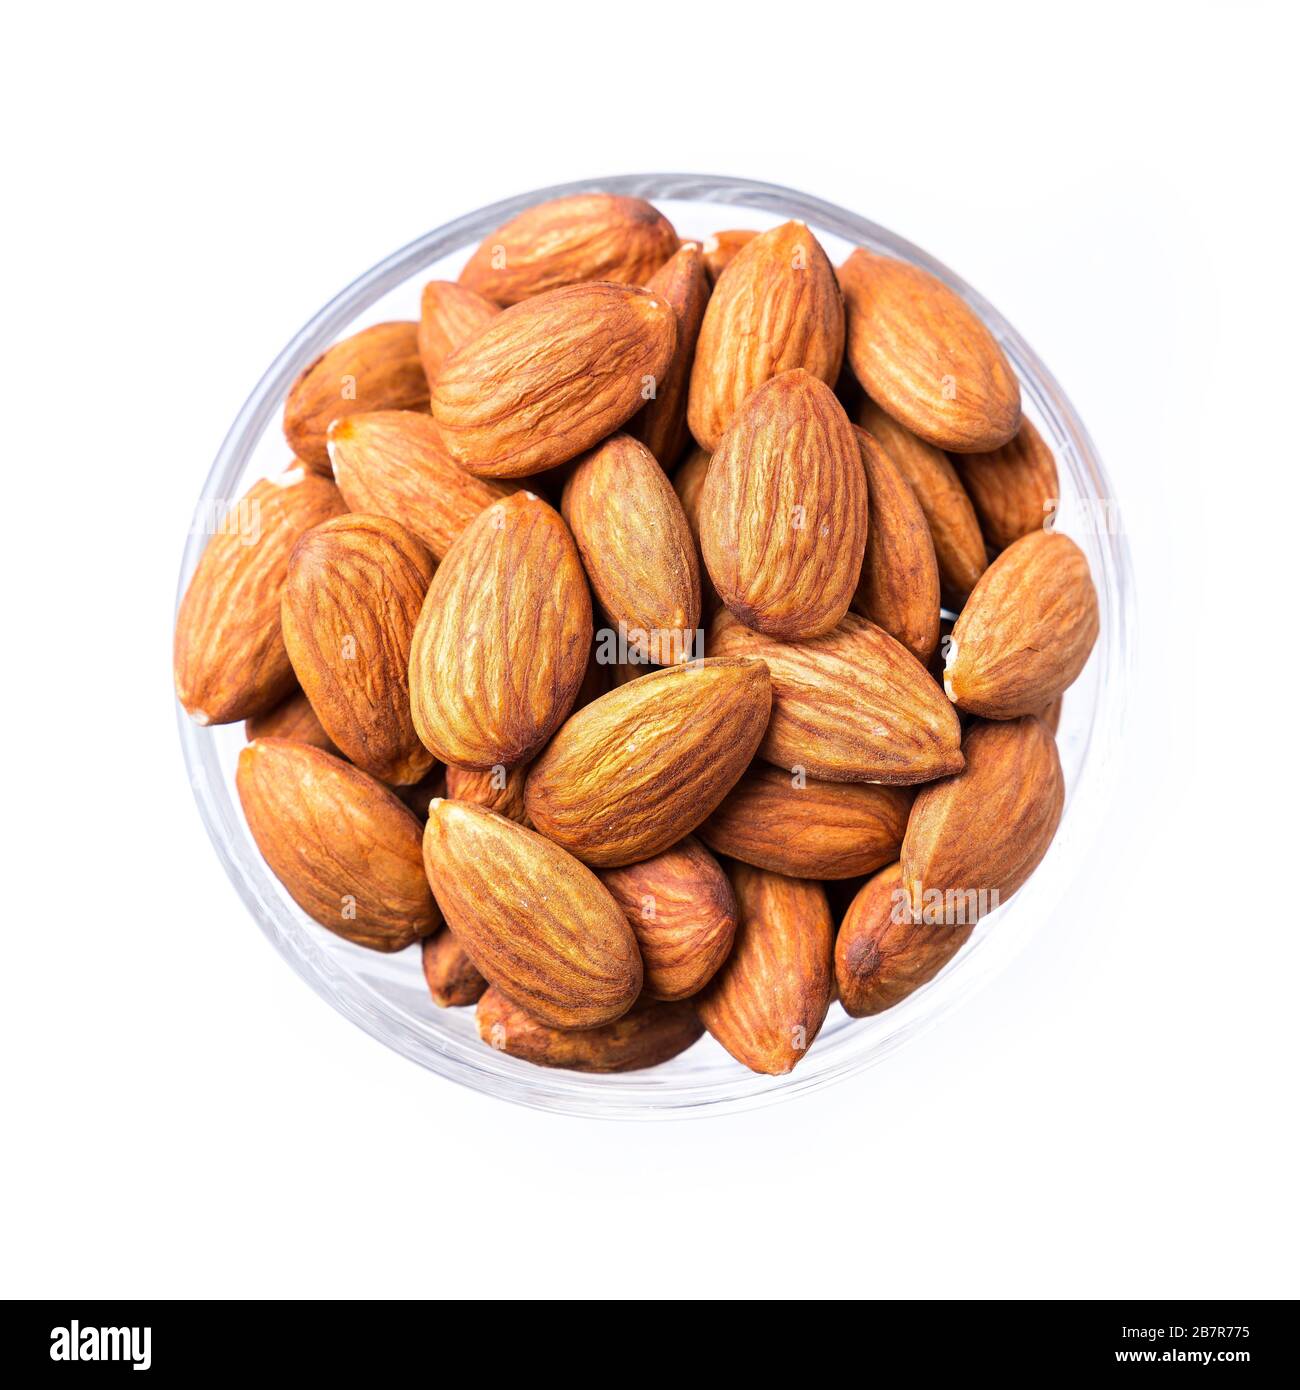 A cup of almonds isolated on white Stock Photo